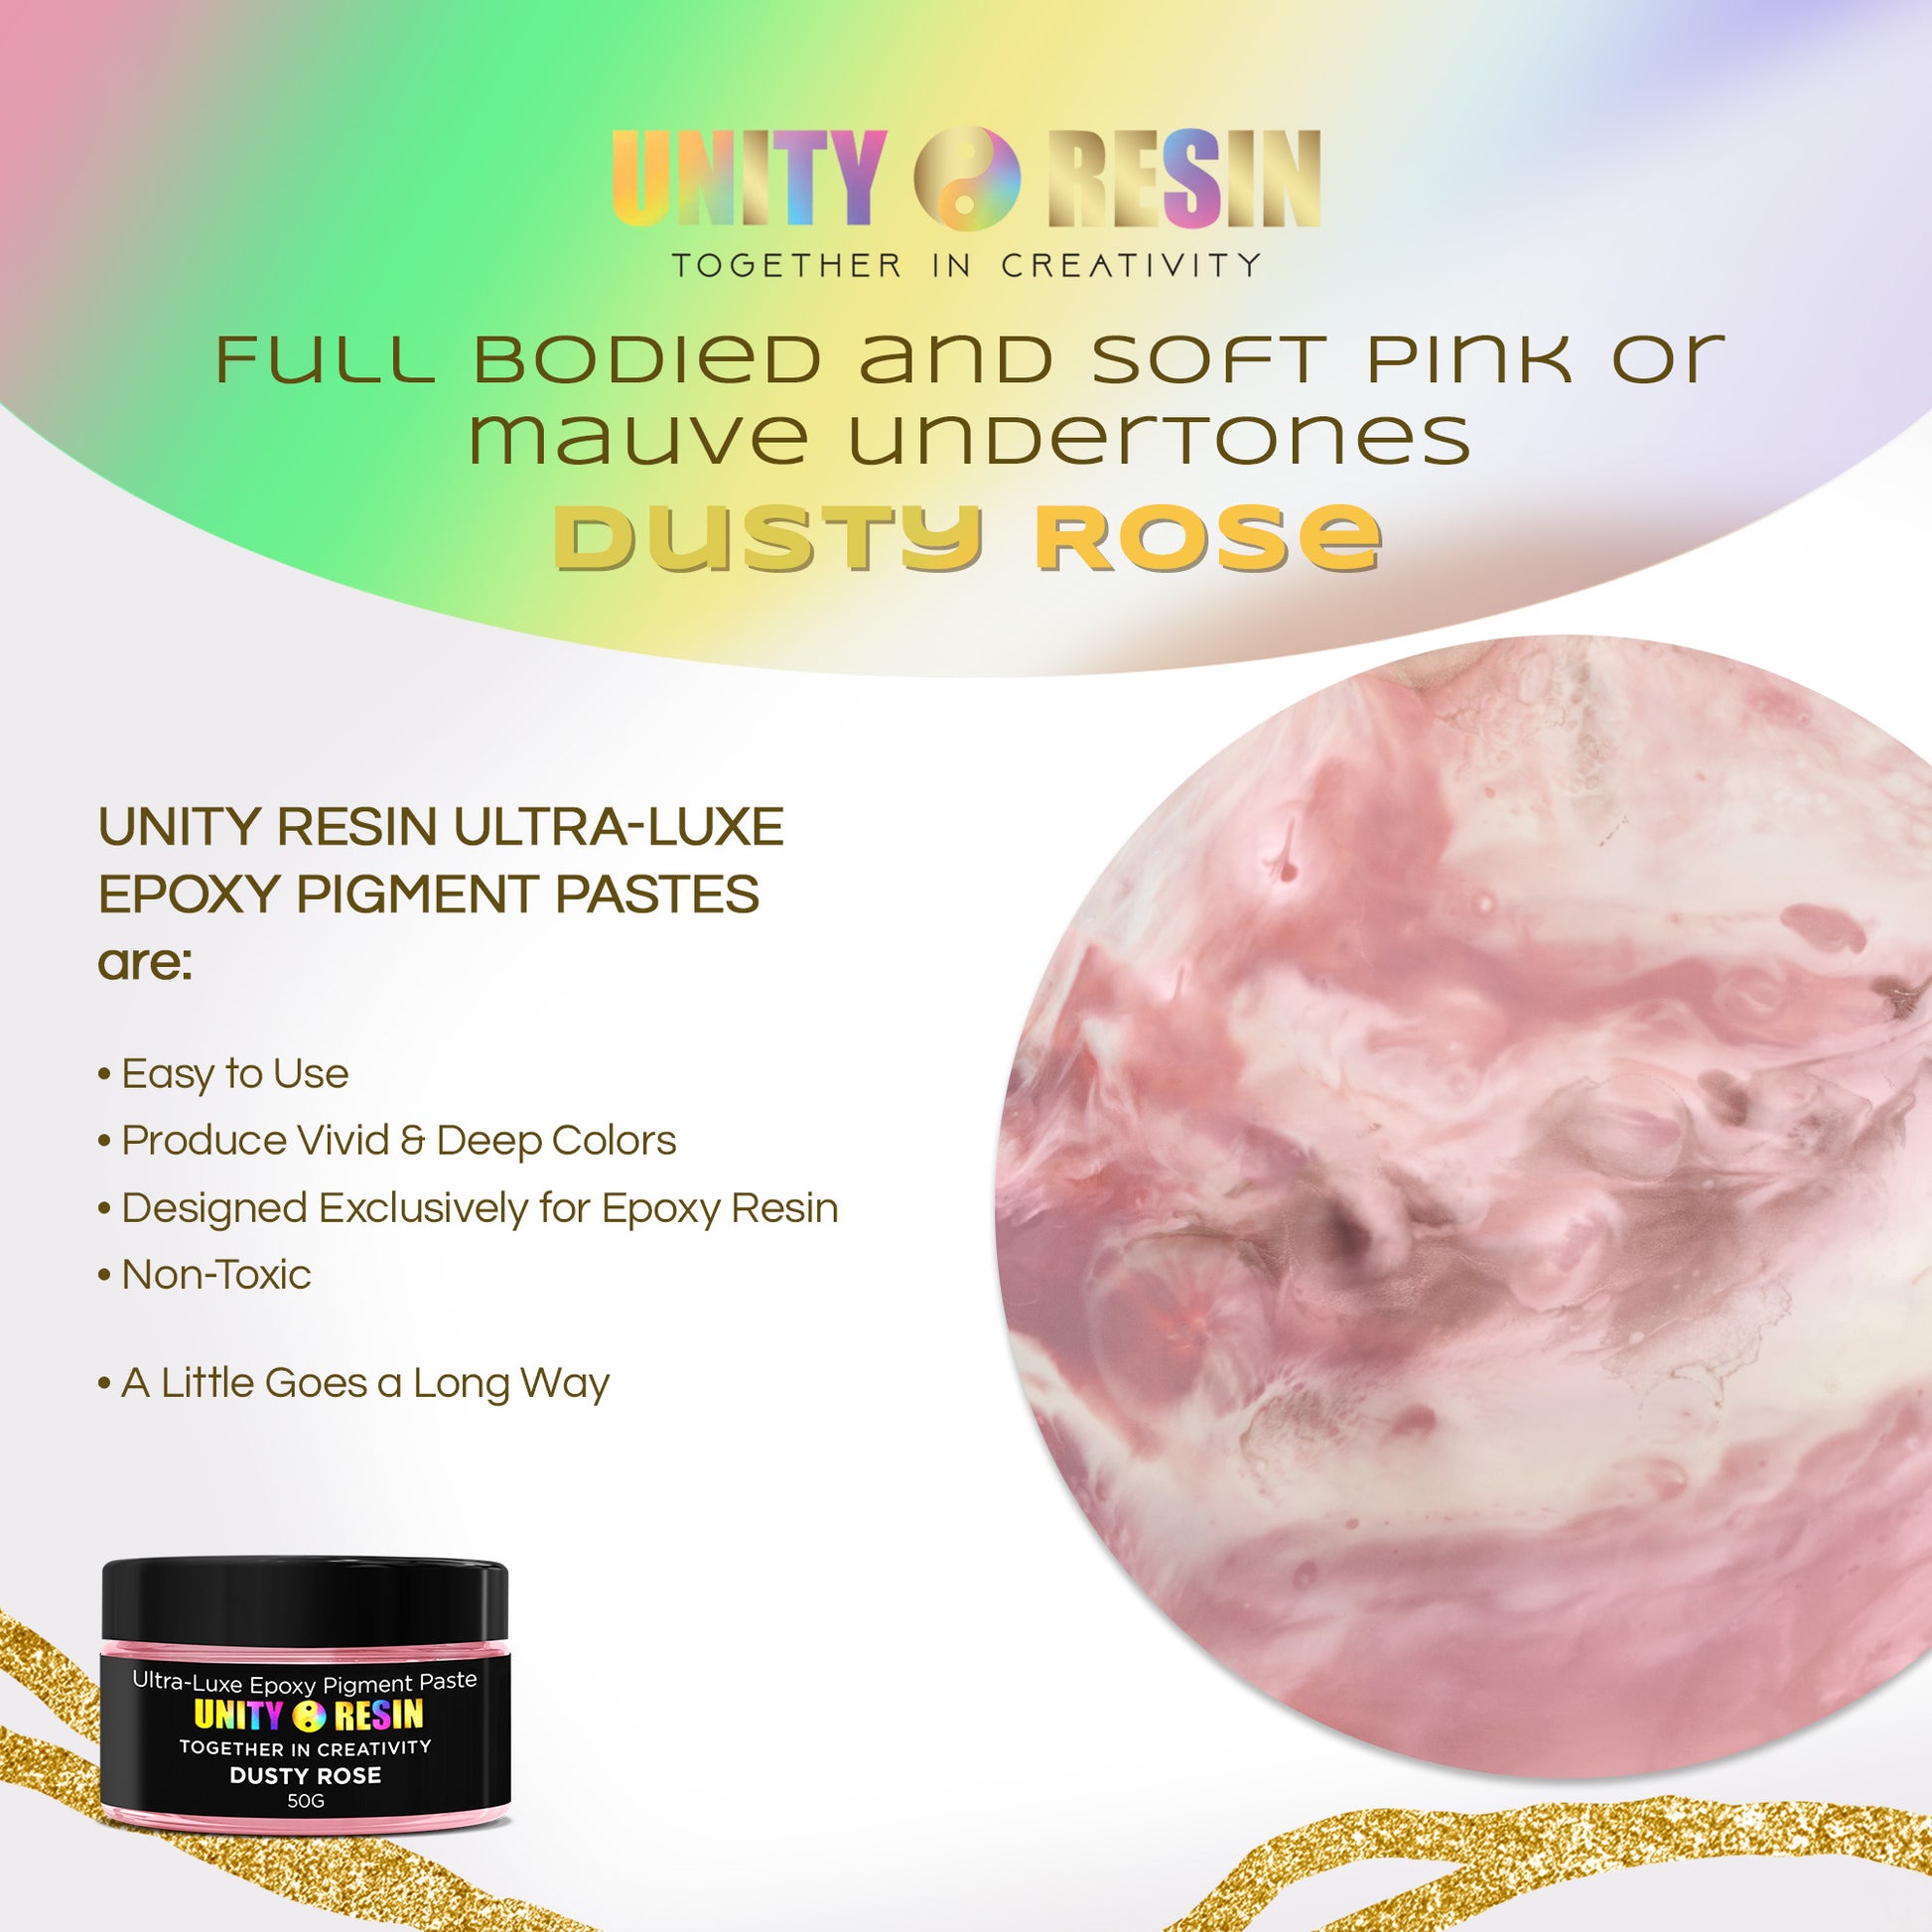 Ultra-Luxe Epoxy Resin Pigment Paste- PLUSH PINK (50G)